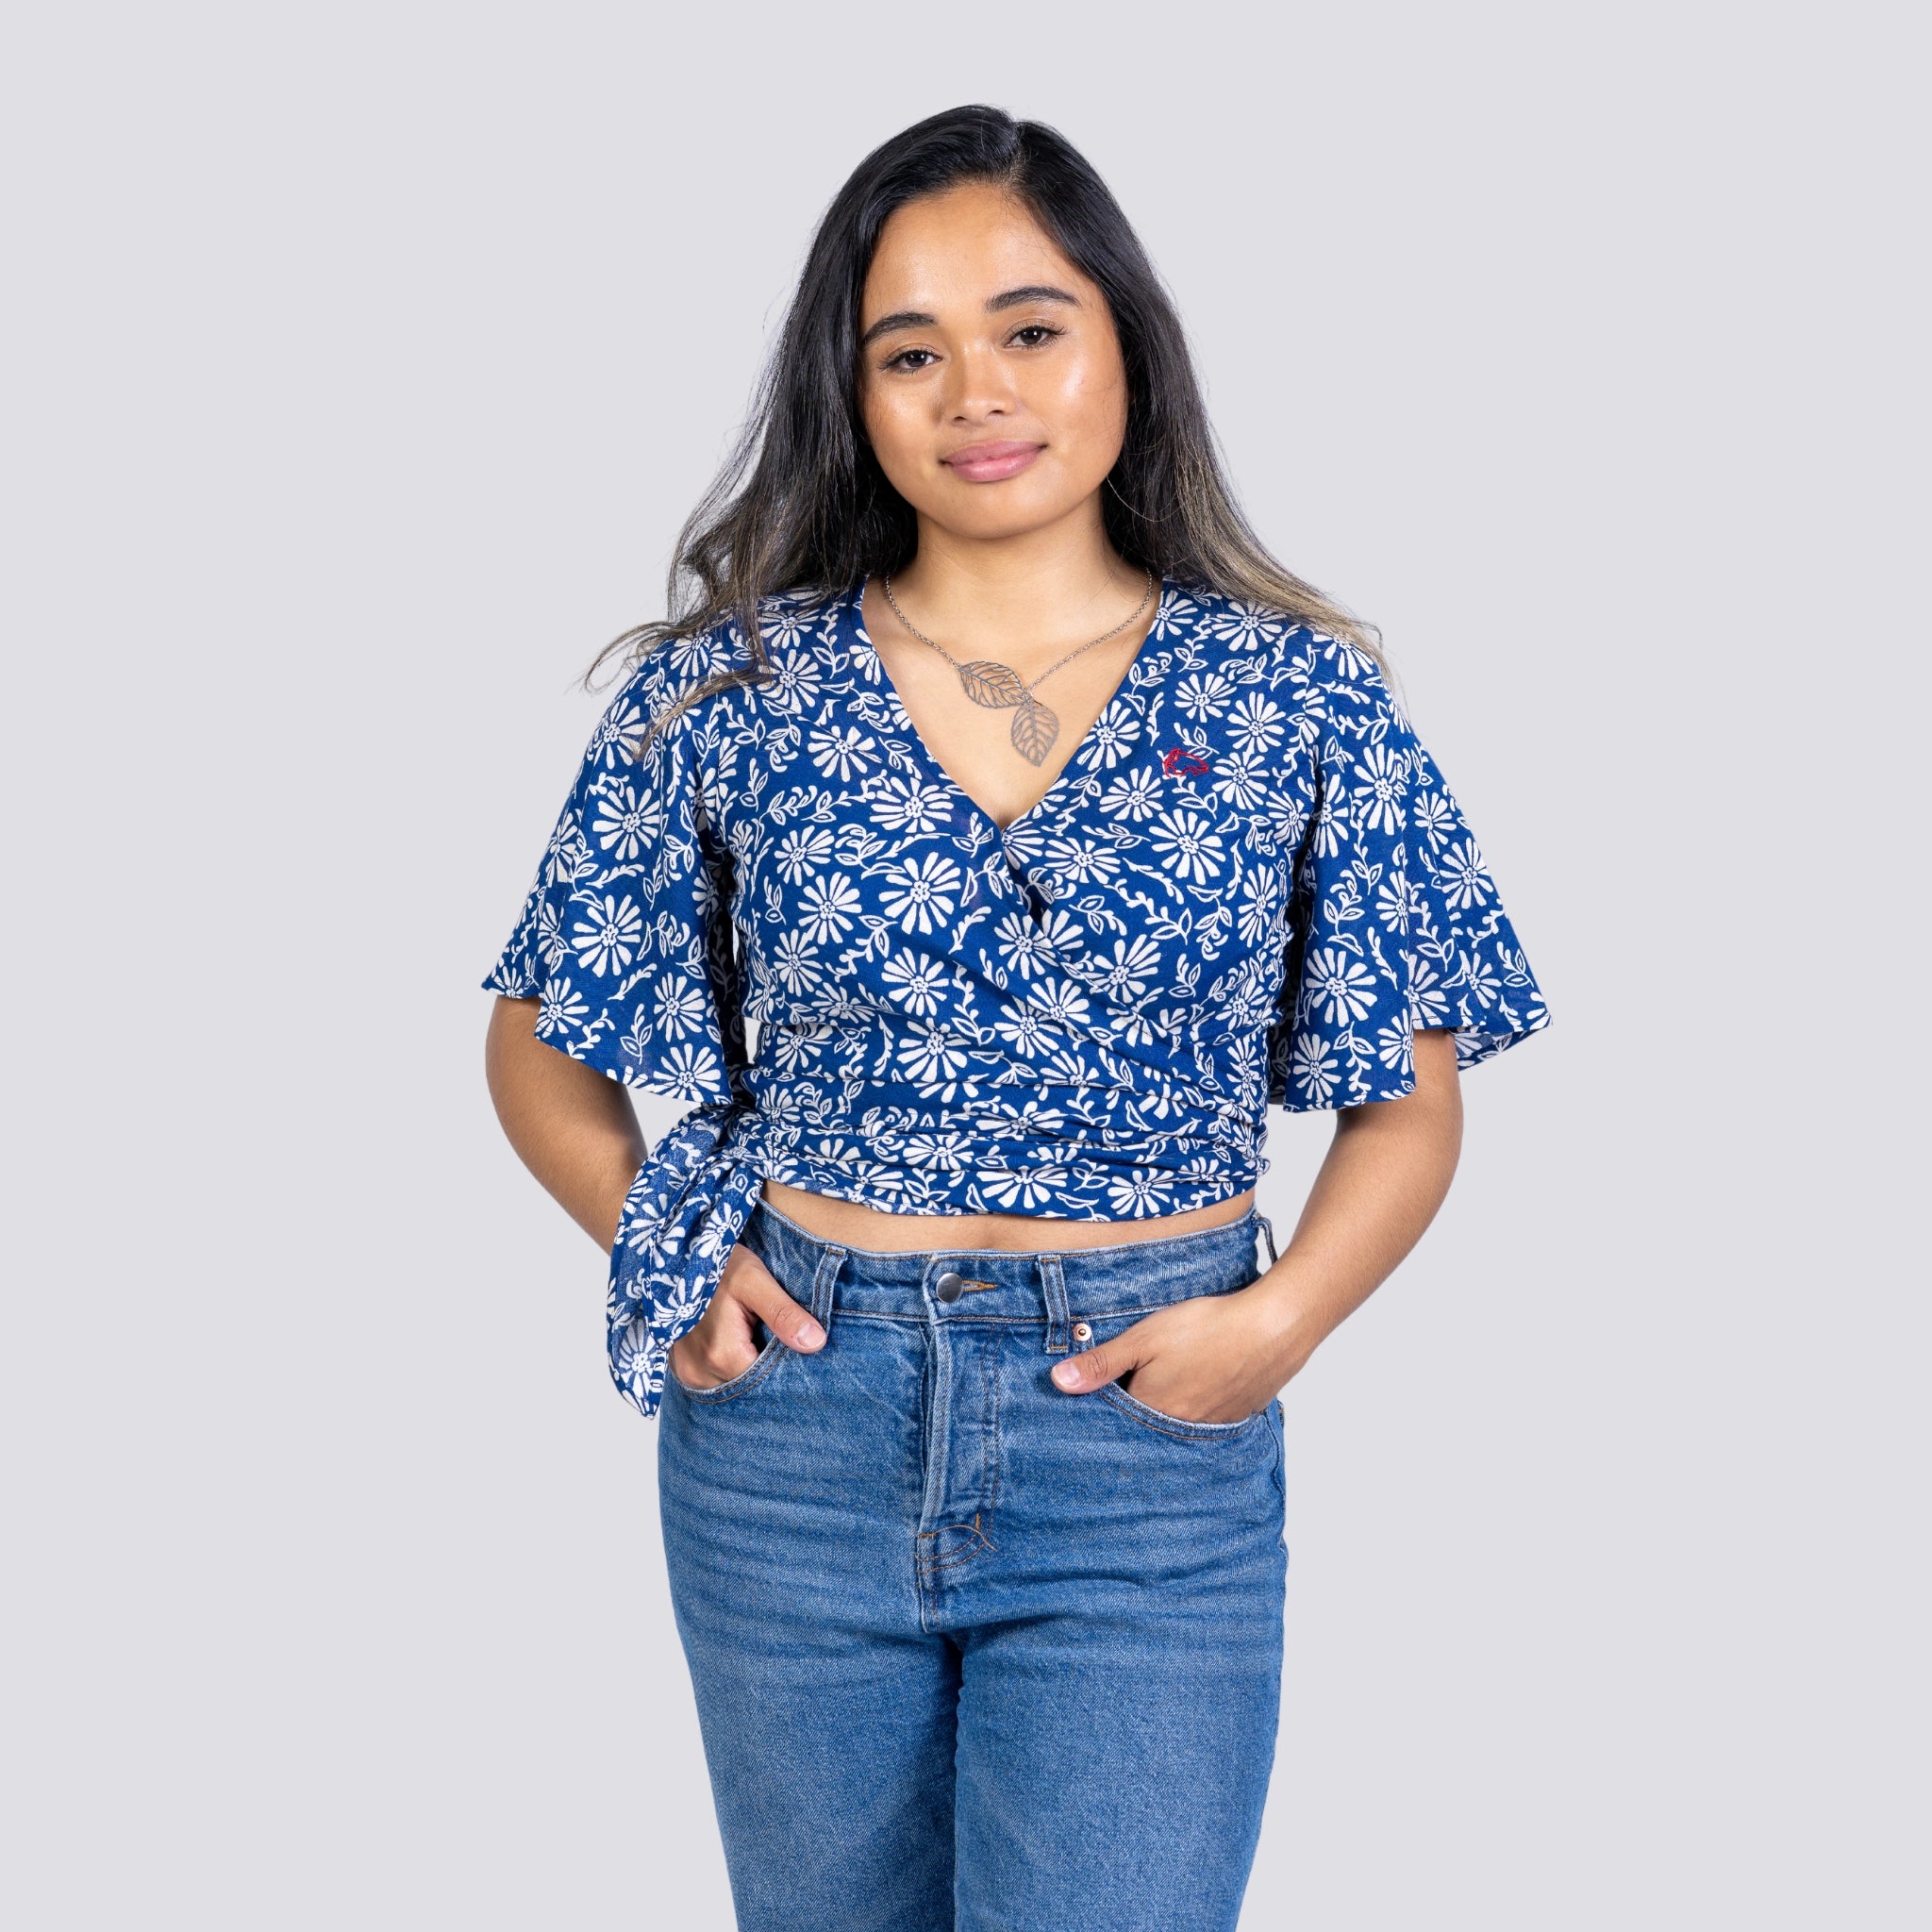 A woman wearing a Karee SereneBloom Women's Eco-Friendly Wrap Top - Blue Bliss and jeans stands with her hands on hips against a grey background.